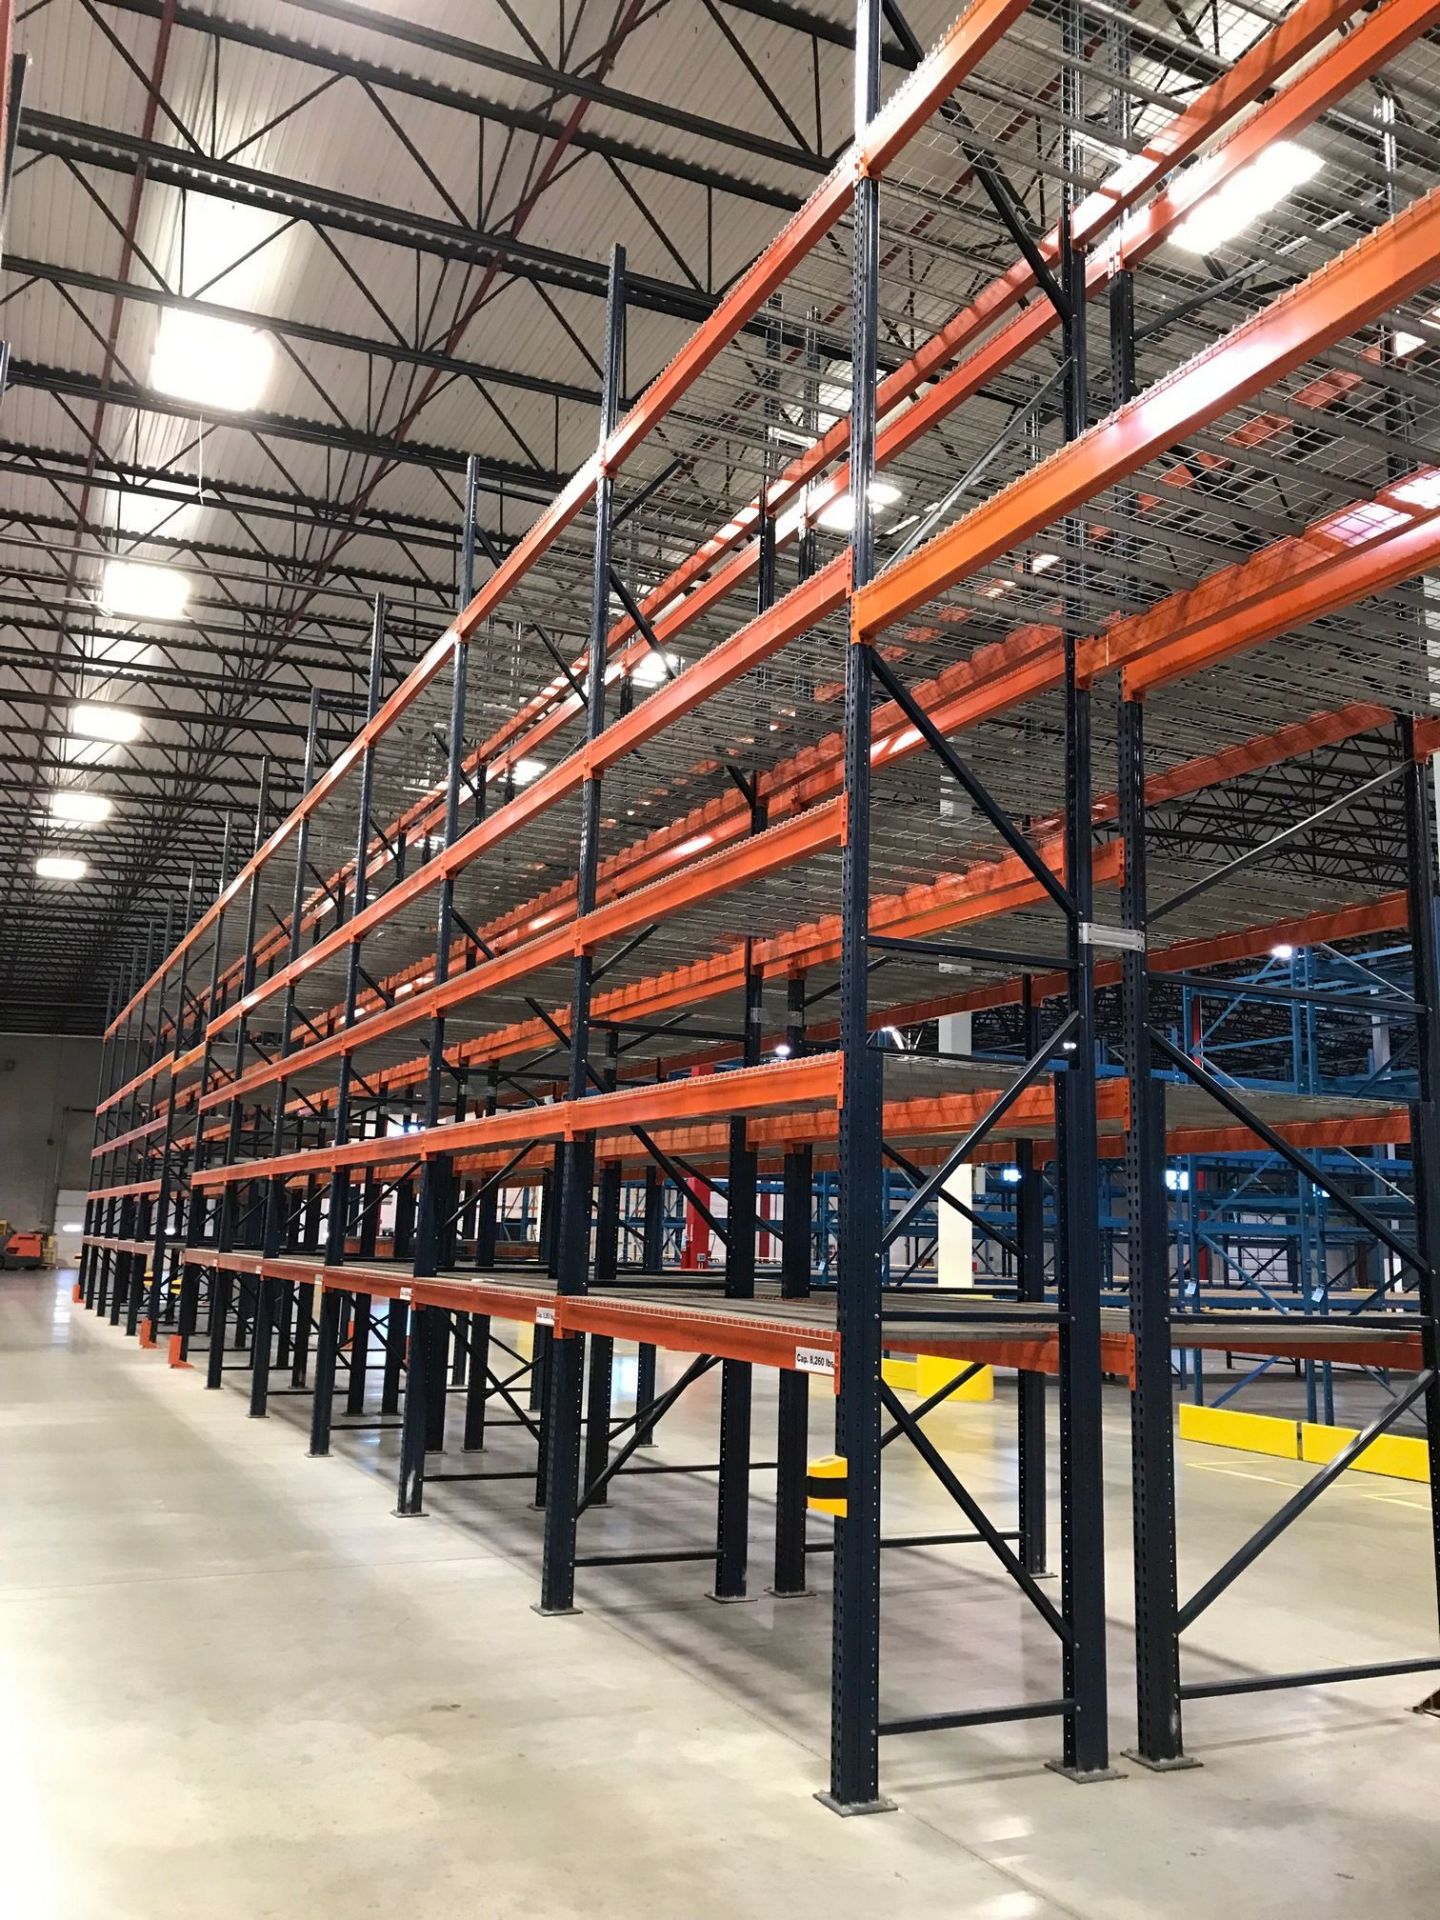 SECTIONS 60" X 108" X 288" TEARDROP TYPE ADJUSTABLE BEAM PALLET RACK WITH WIRE DECKING, 6" HIGH - Image 8 of 13